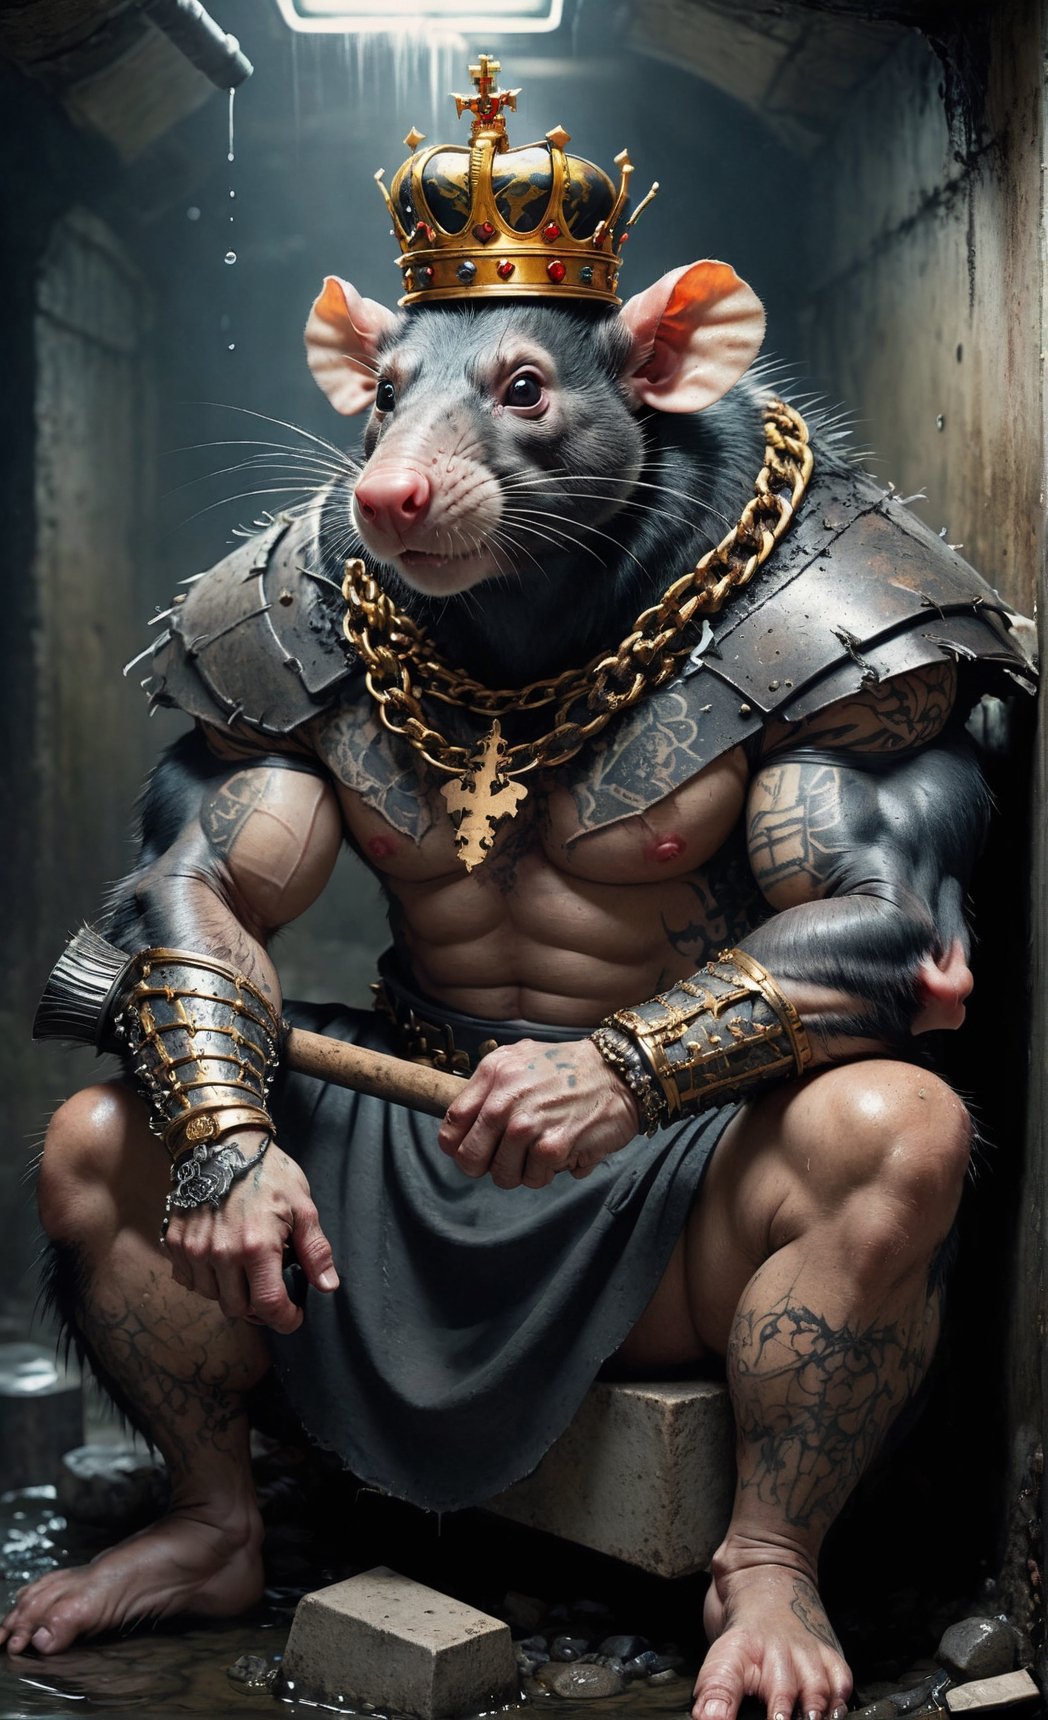 digital art 8k,  a ripped,  muscluar,  humanoid rat sitting on a toilet in a dark damp sewer,  wearing a crown, the rat king is weilding a large sledge hammer over its shoulder. The rat king should have scars, wounds from battle, war tattoos, gold chains around his neck. The rat king should have "kingrat_" tattooed on his arm. "2024" should be tattooed on his other arm.

The rat king should look aggressive and defiant.,band_bodysuit